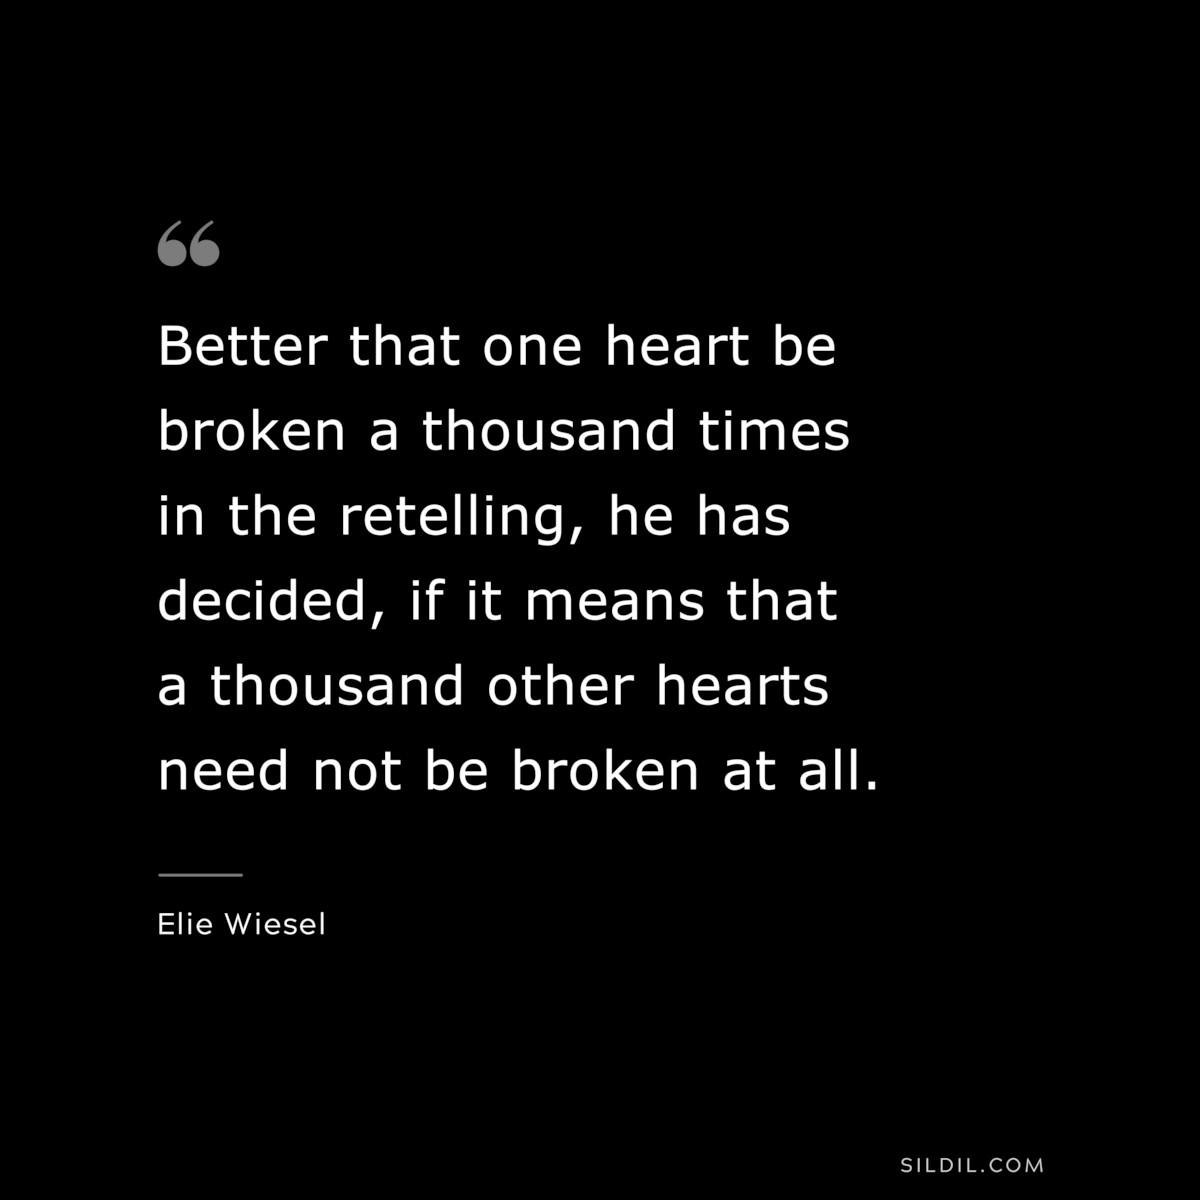 Better that one heart be broken a thousand times in the retelling, he has decided, if it means that a thousand other hearts need not be broken at all. ― Elie Wiesel